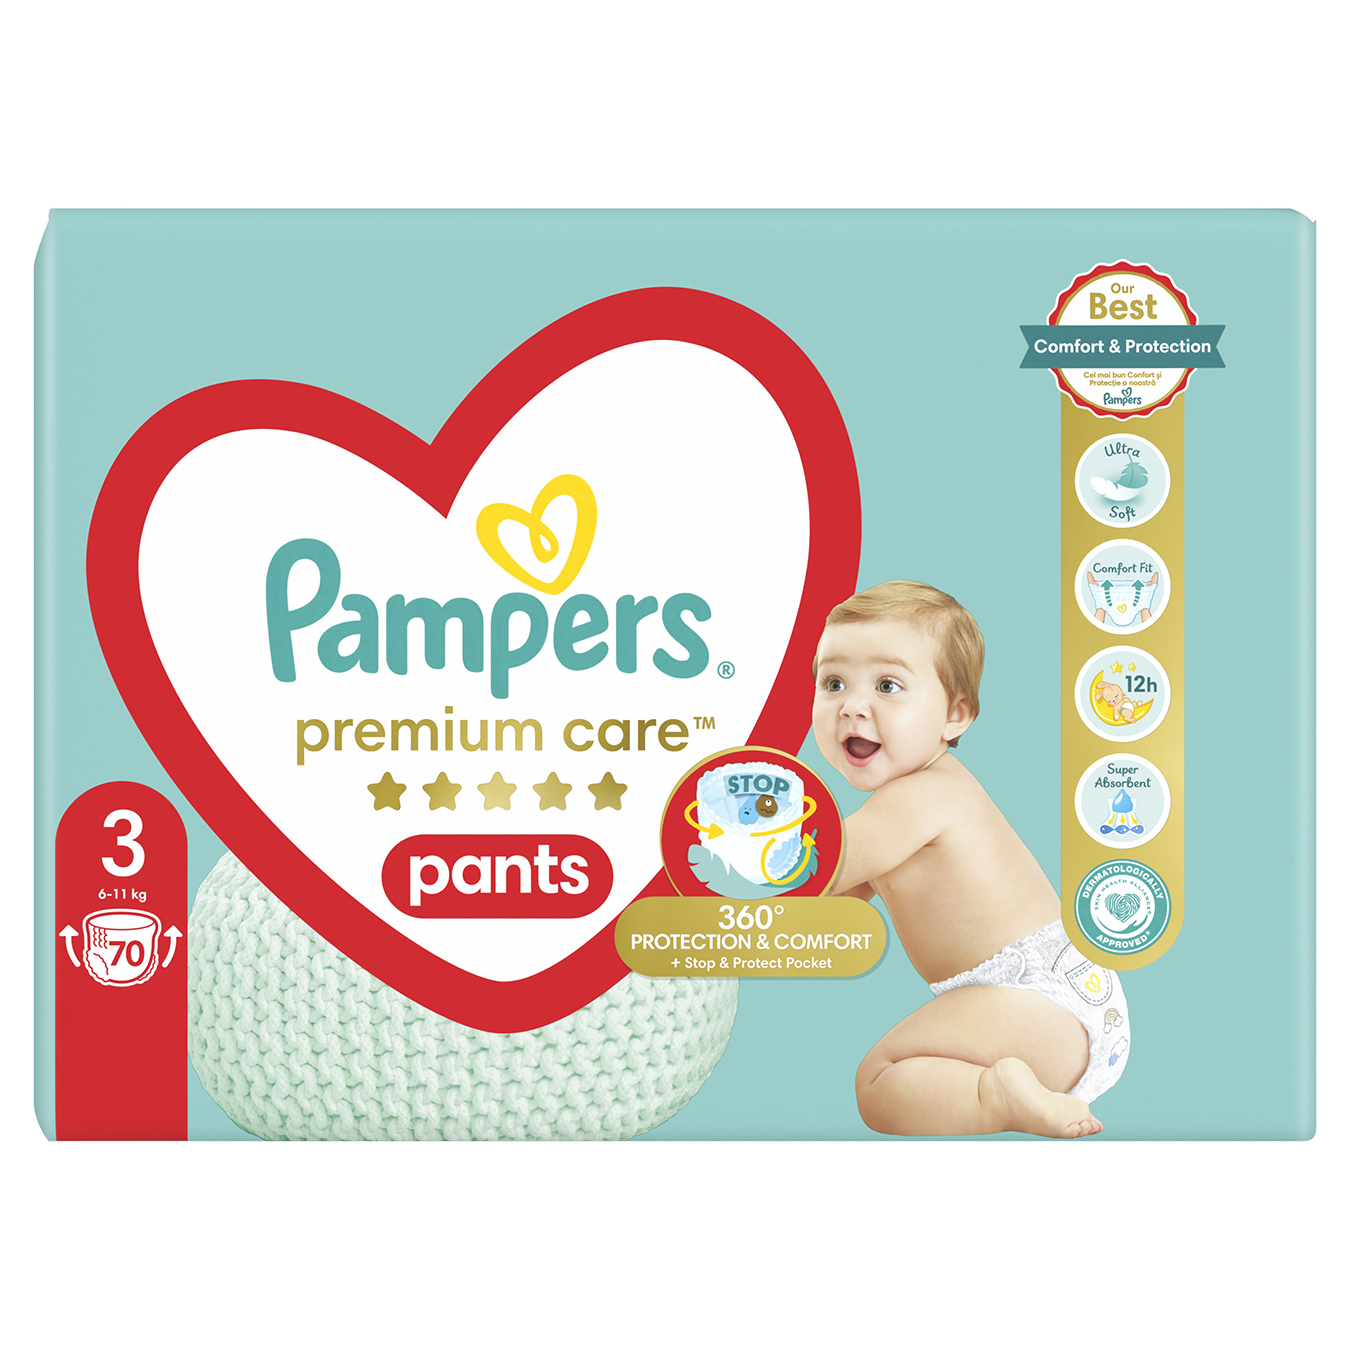 Care Premium a pcs for ᐈ Novus 70 at price Midi 6-11 good from Pampers children kg Buy diapers-panties Pants